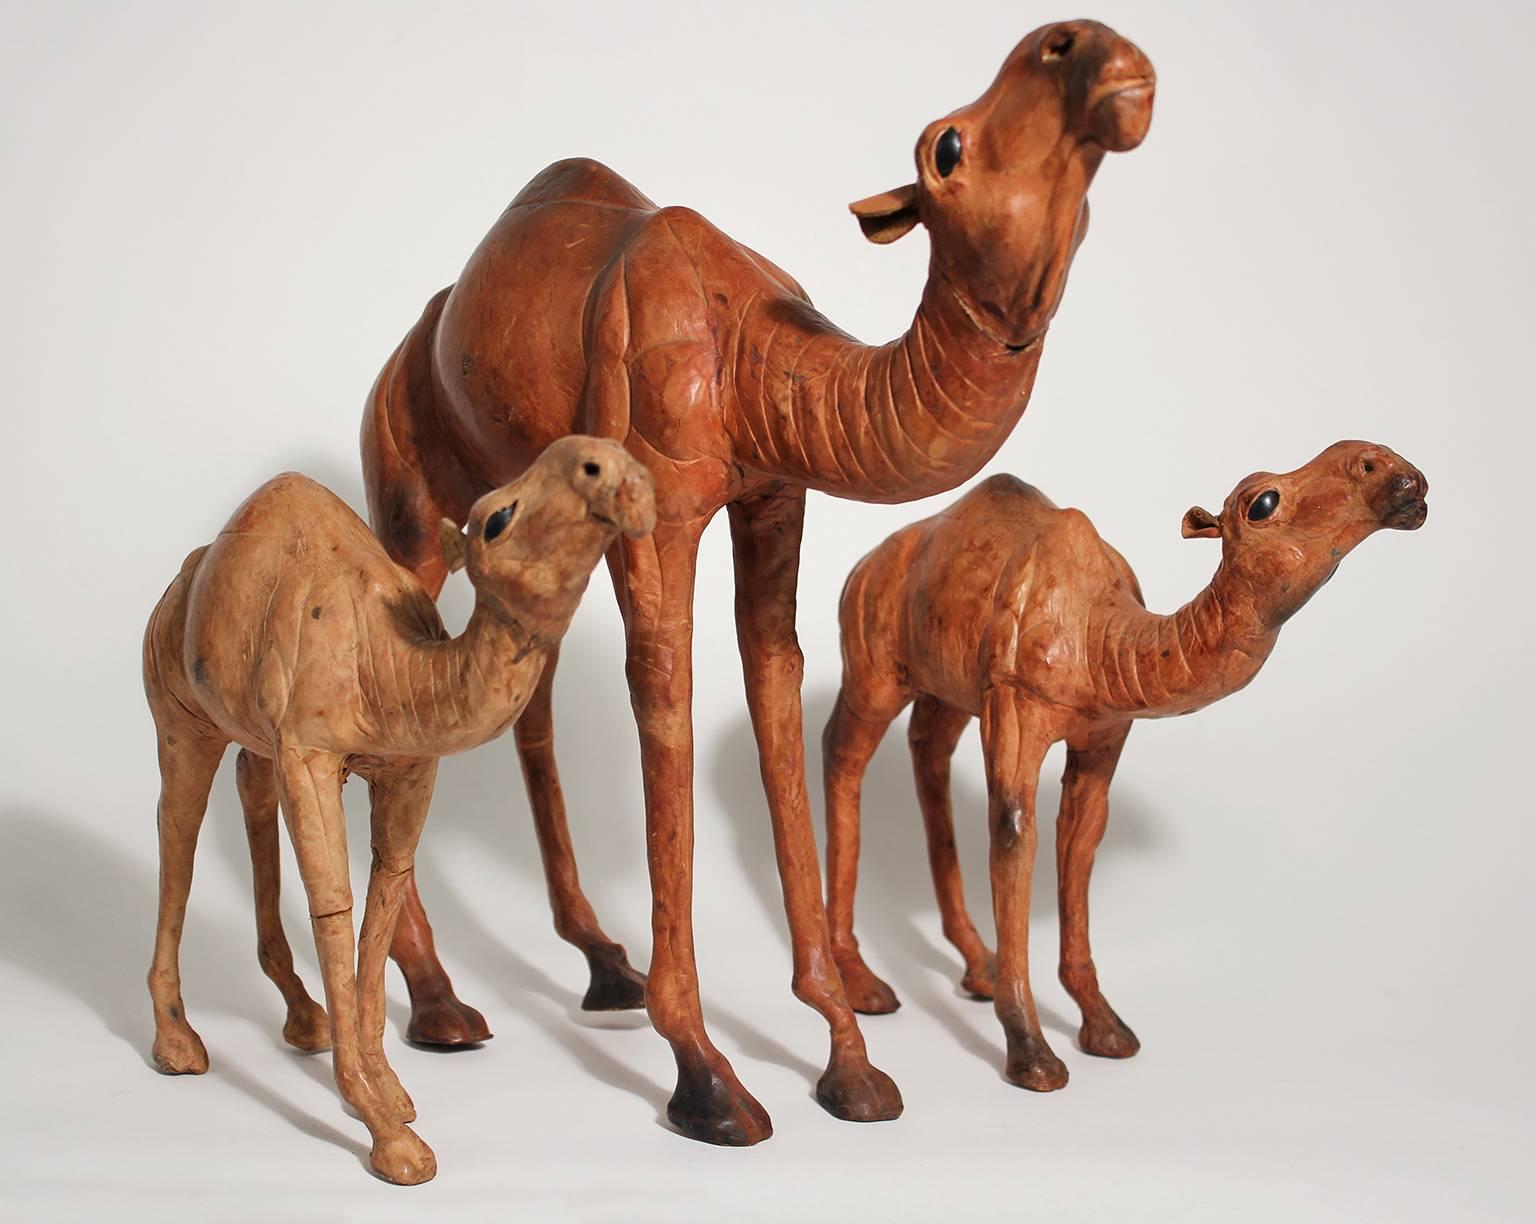 Very unique set of three Italian leather wrapped camel figurines. The outer surface is leather and all three have glass eyes. Detail is excellent. In nice shape with normal wear from age. 
Large camel measures 12